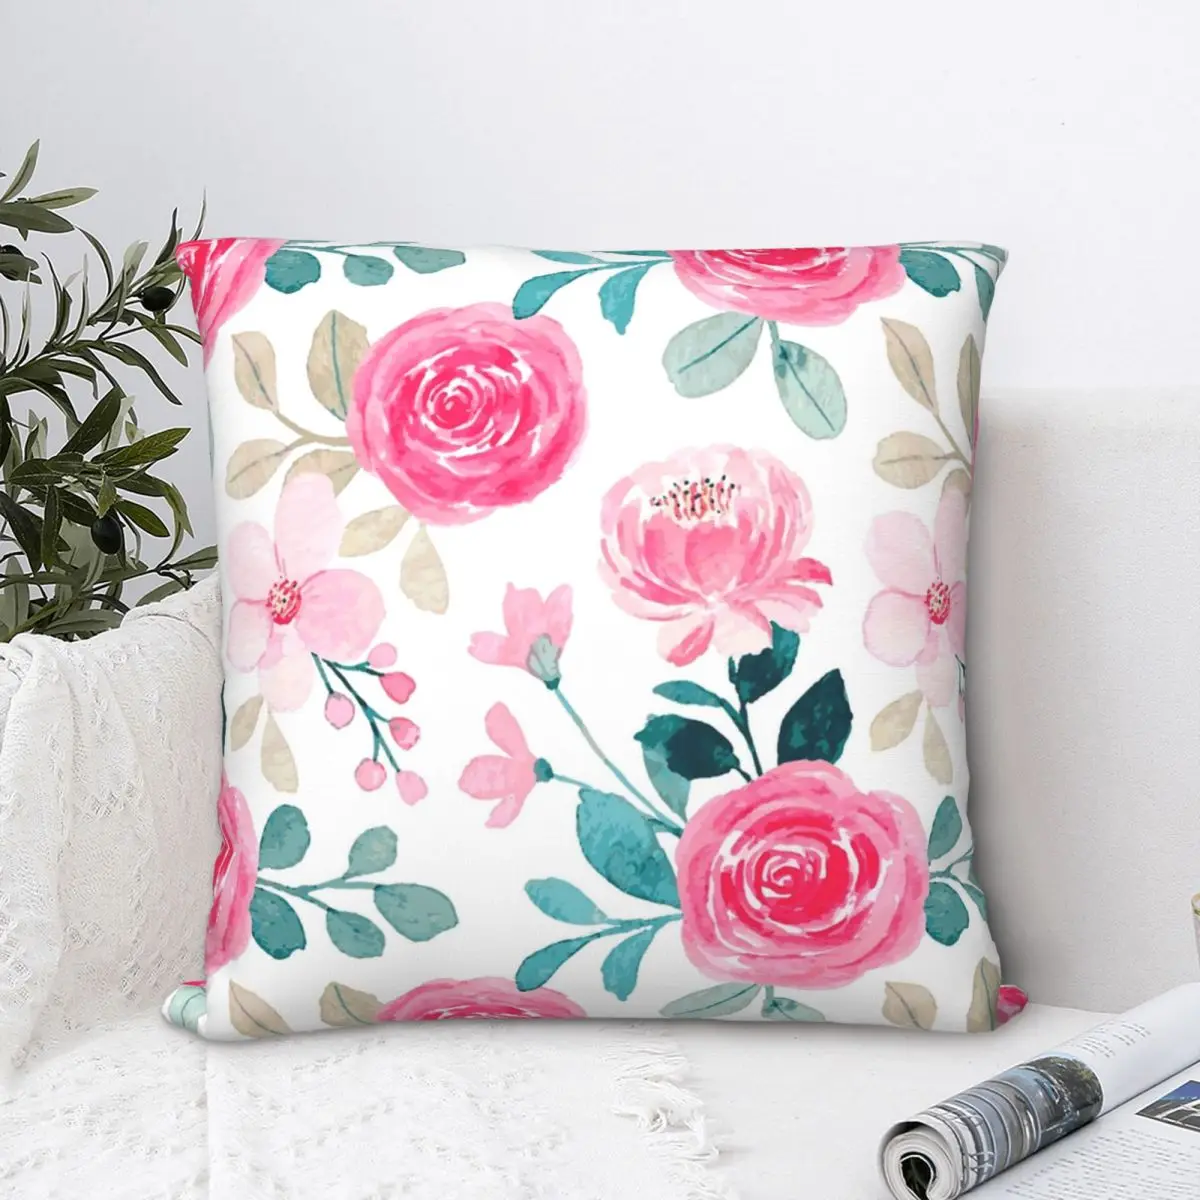 Pink And Rose Cushion Covers Floral Throw Waist Pillow Case Sofa Home Decoration 